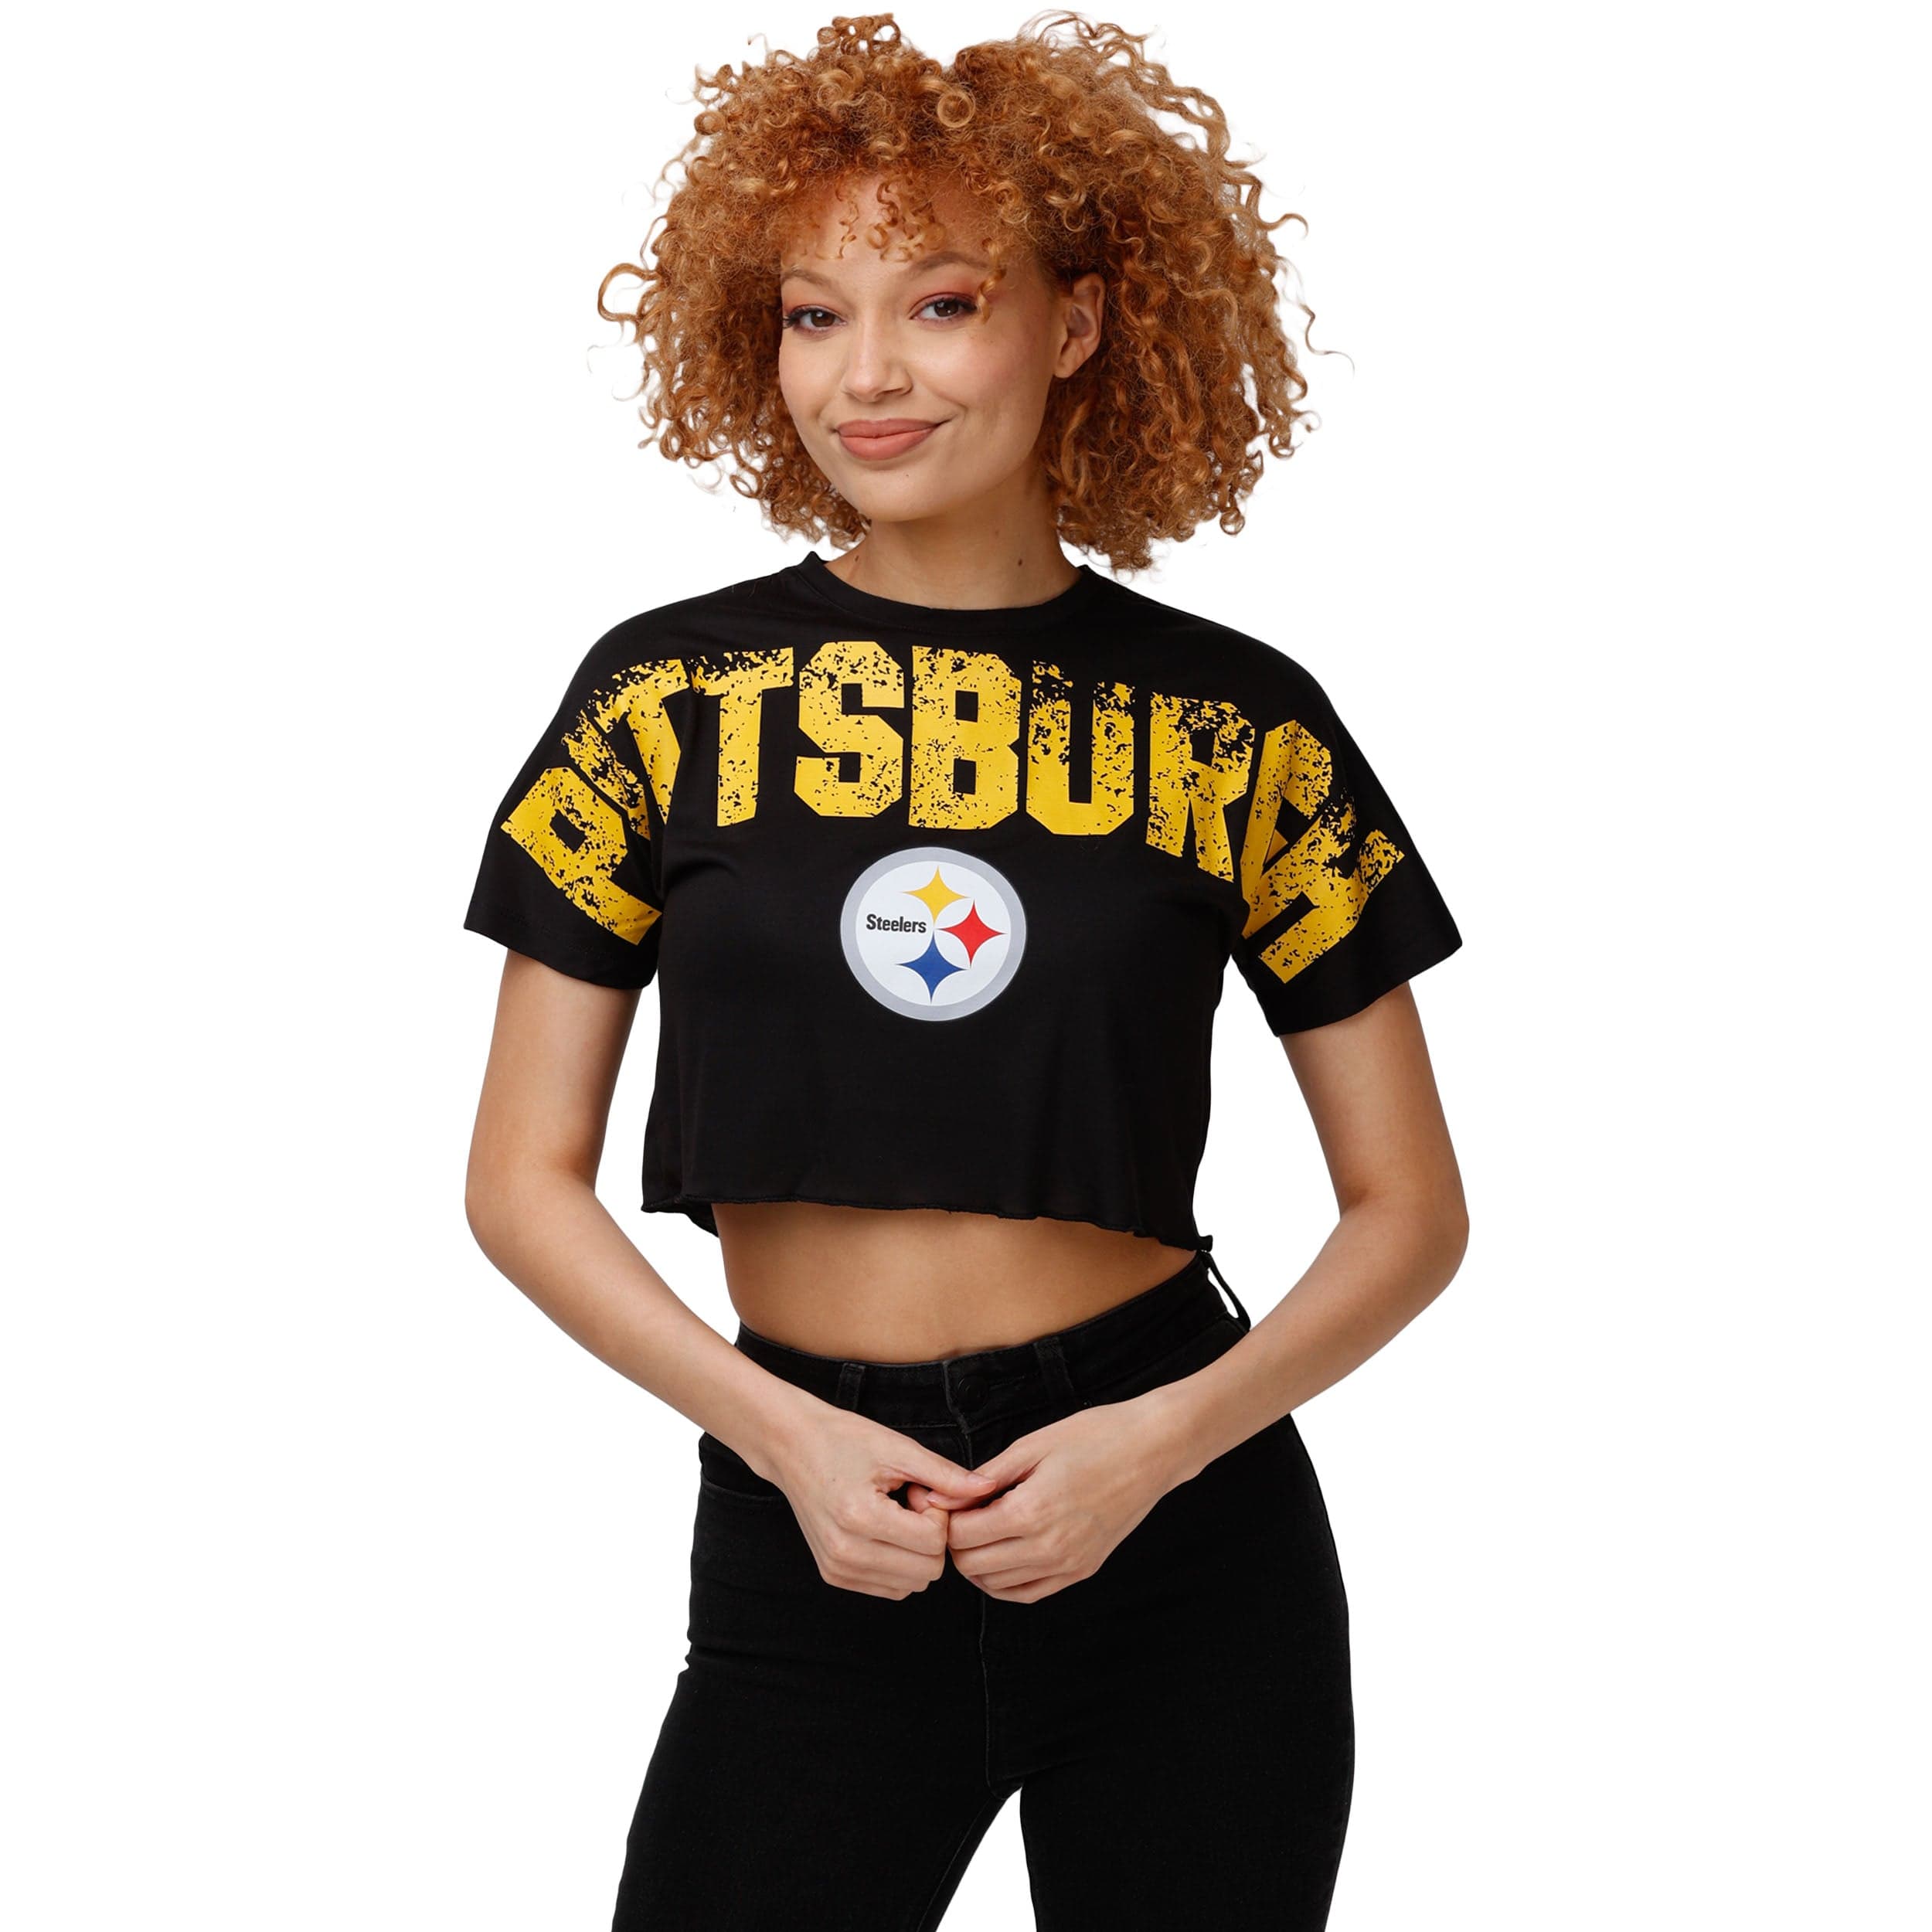 NFL TEAM APPAREL Pittsburgh Steelers womens crop top shirt size Small Black